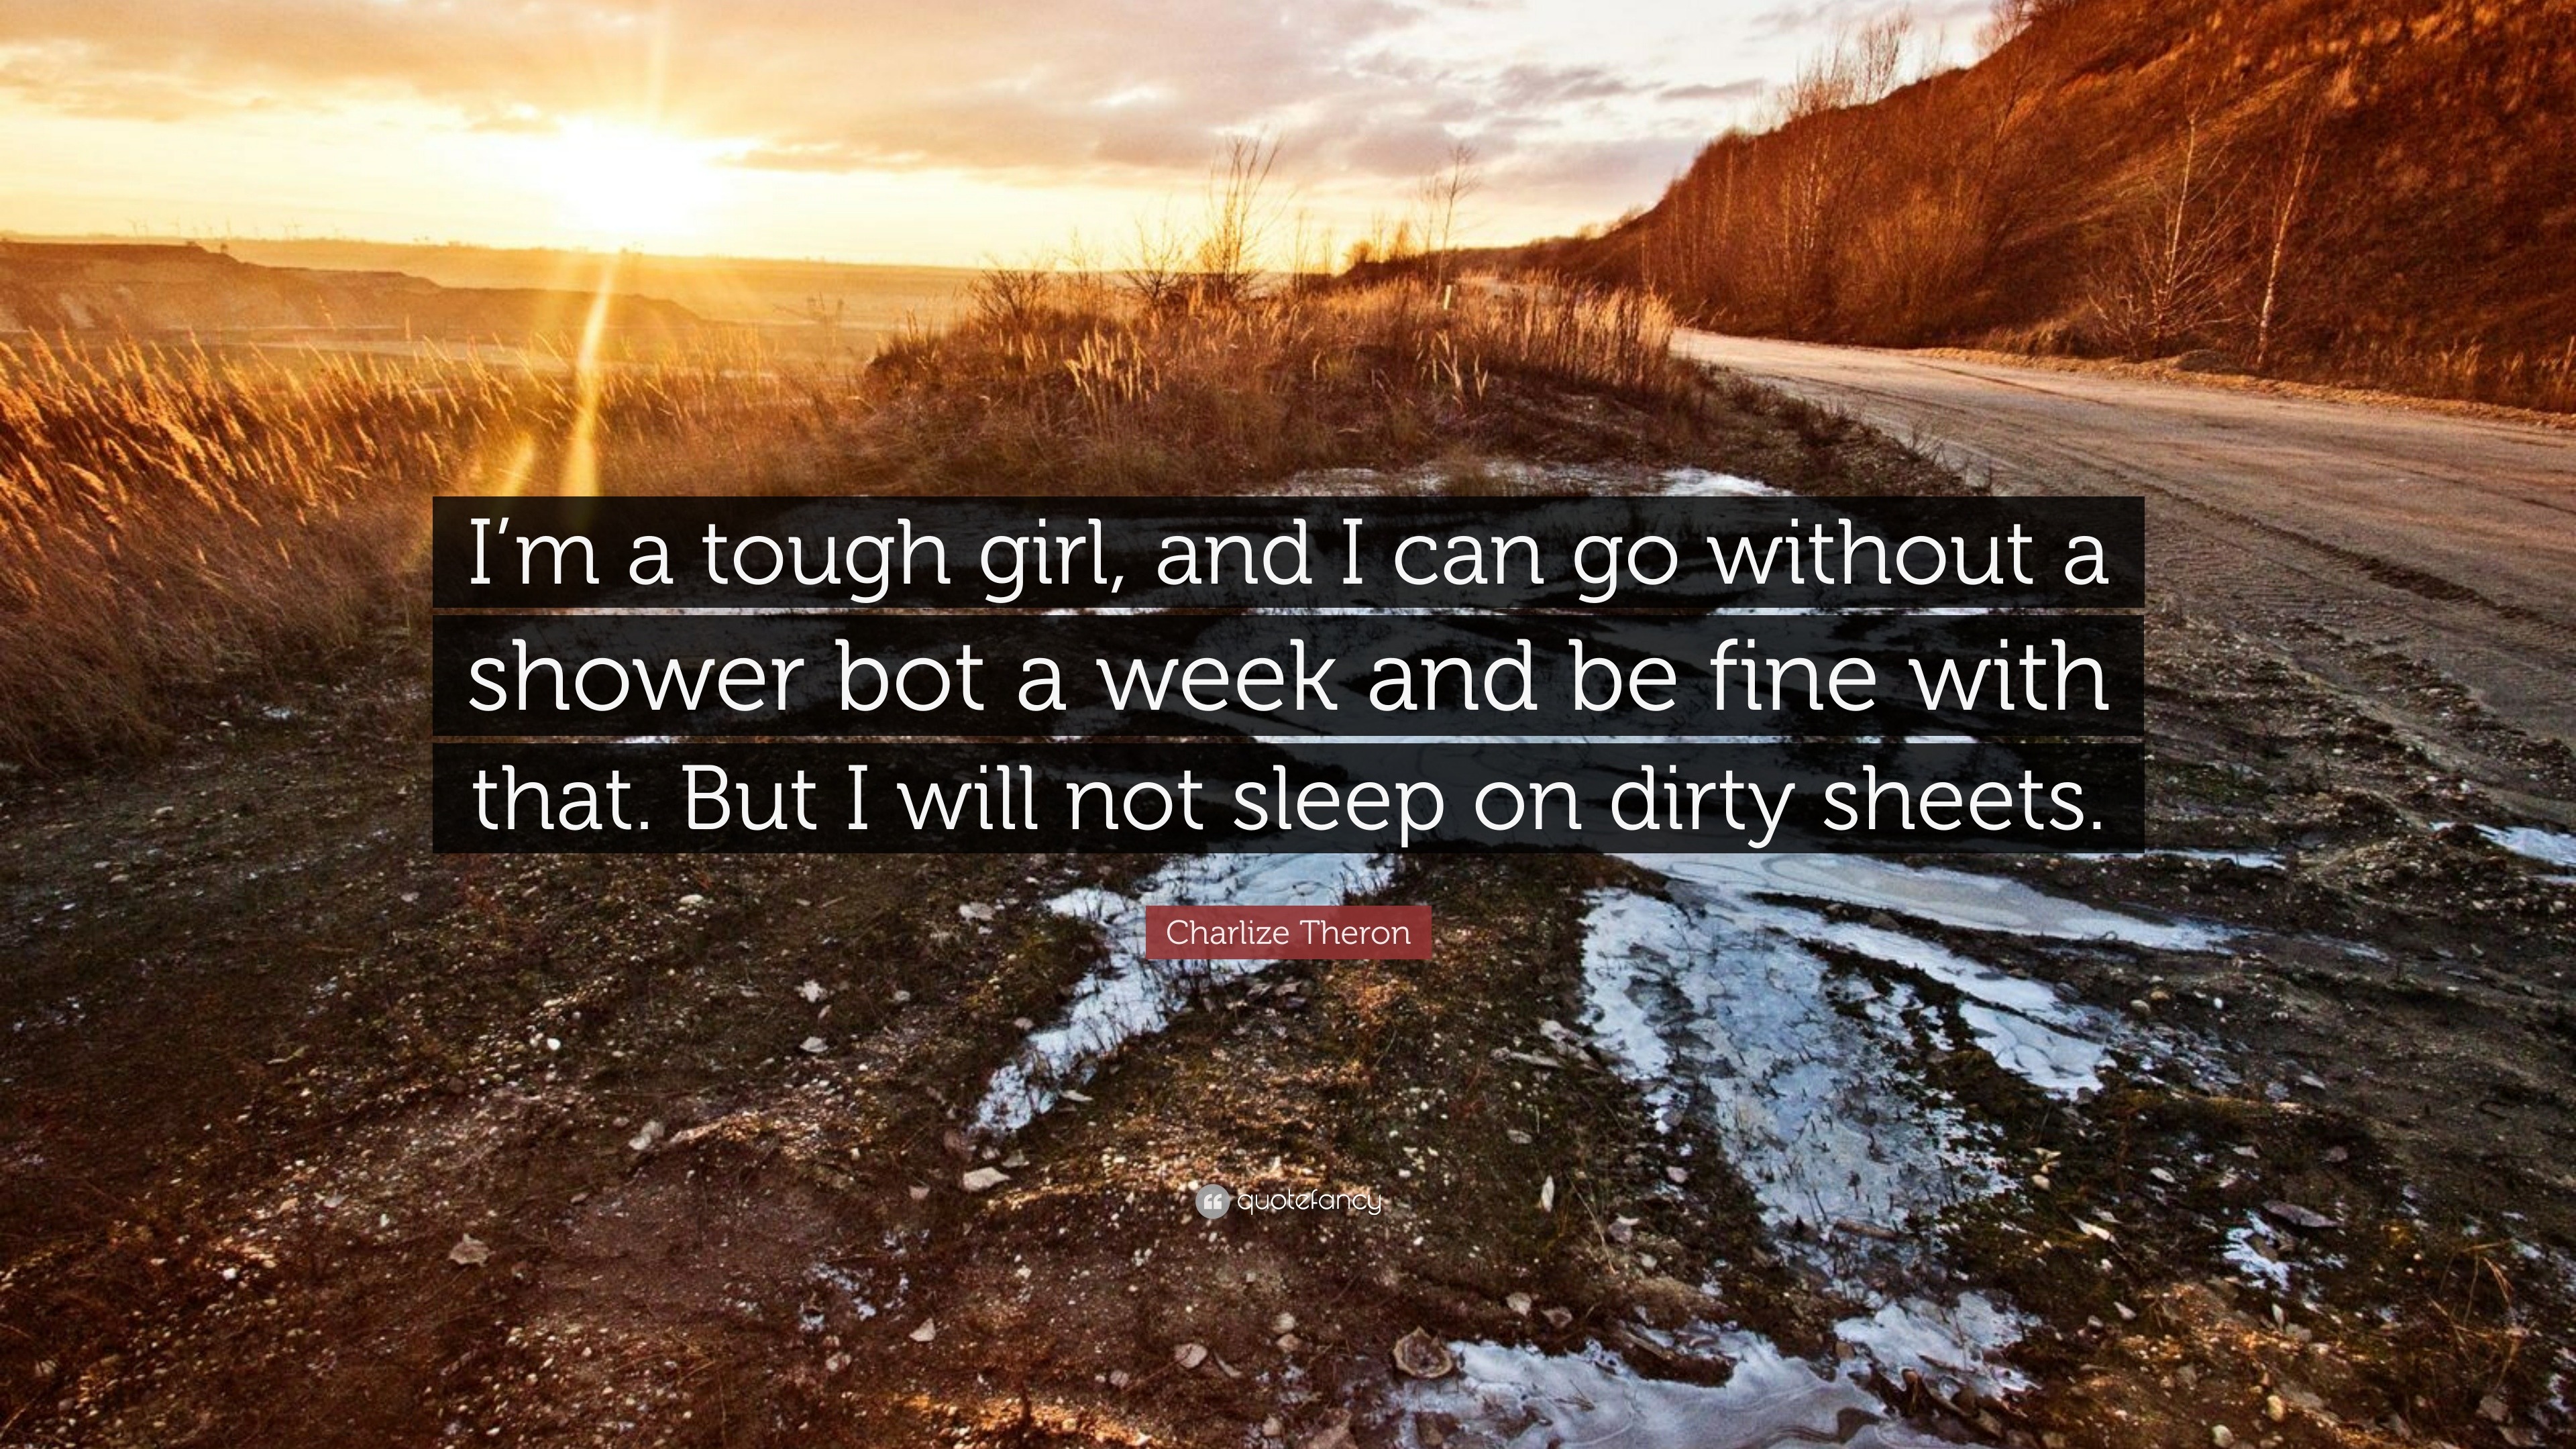 Quotes about being a tough girl